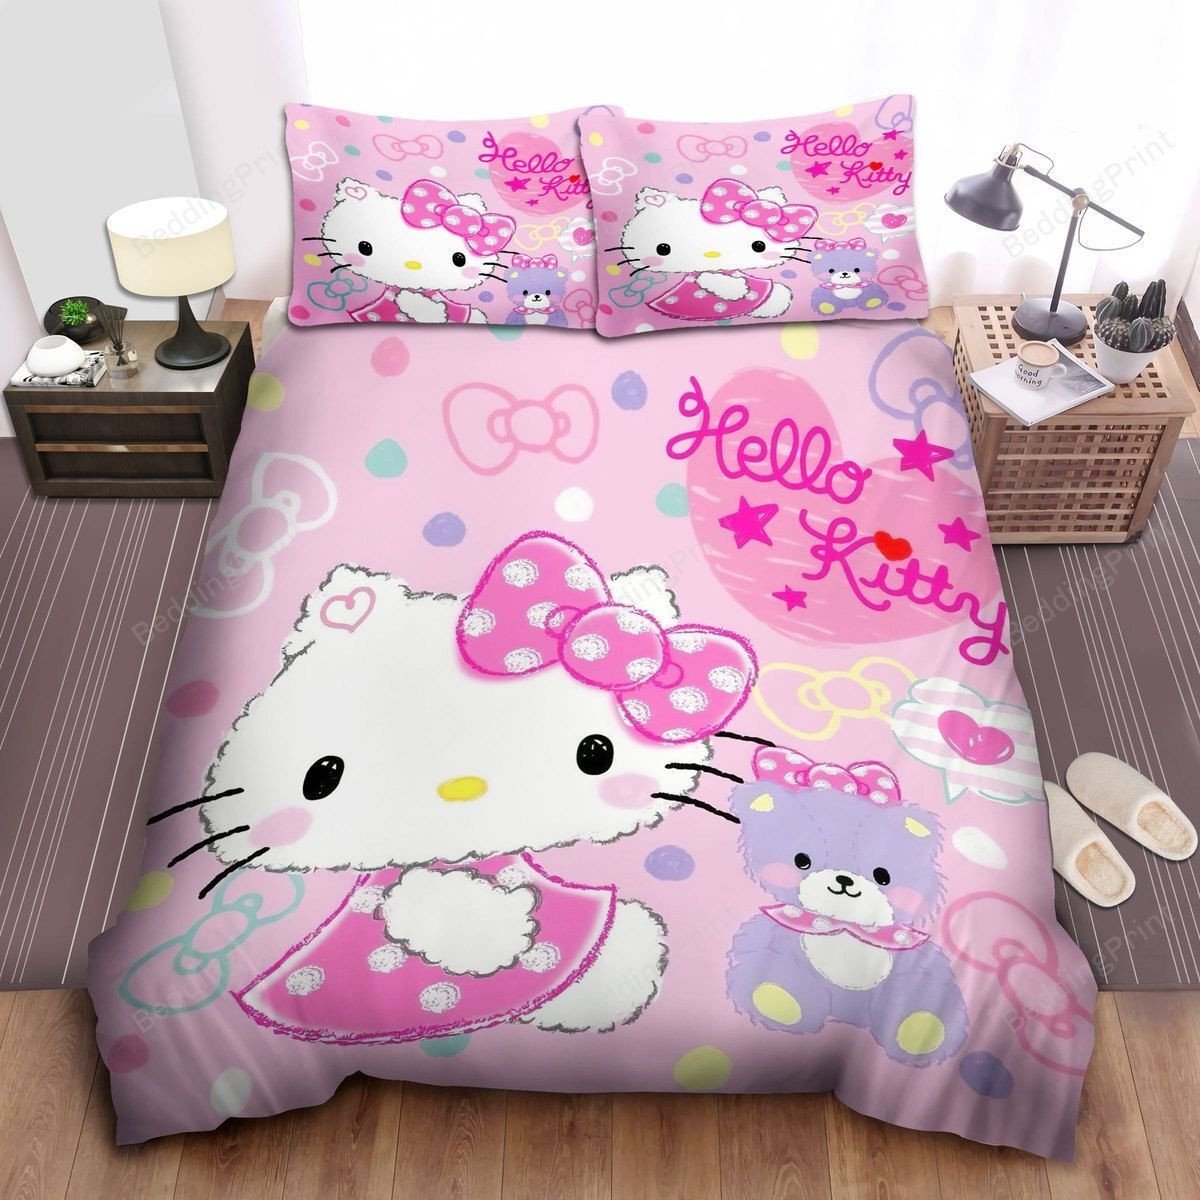 Hello Kitty In Crayon Drawing Bed Sheets Duvet Cover Bedding Sets